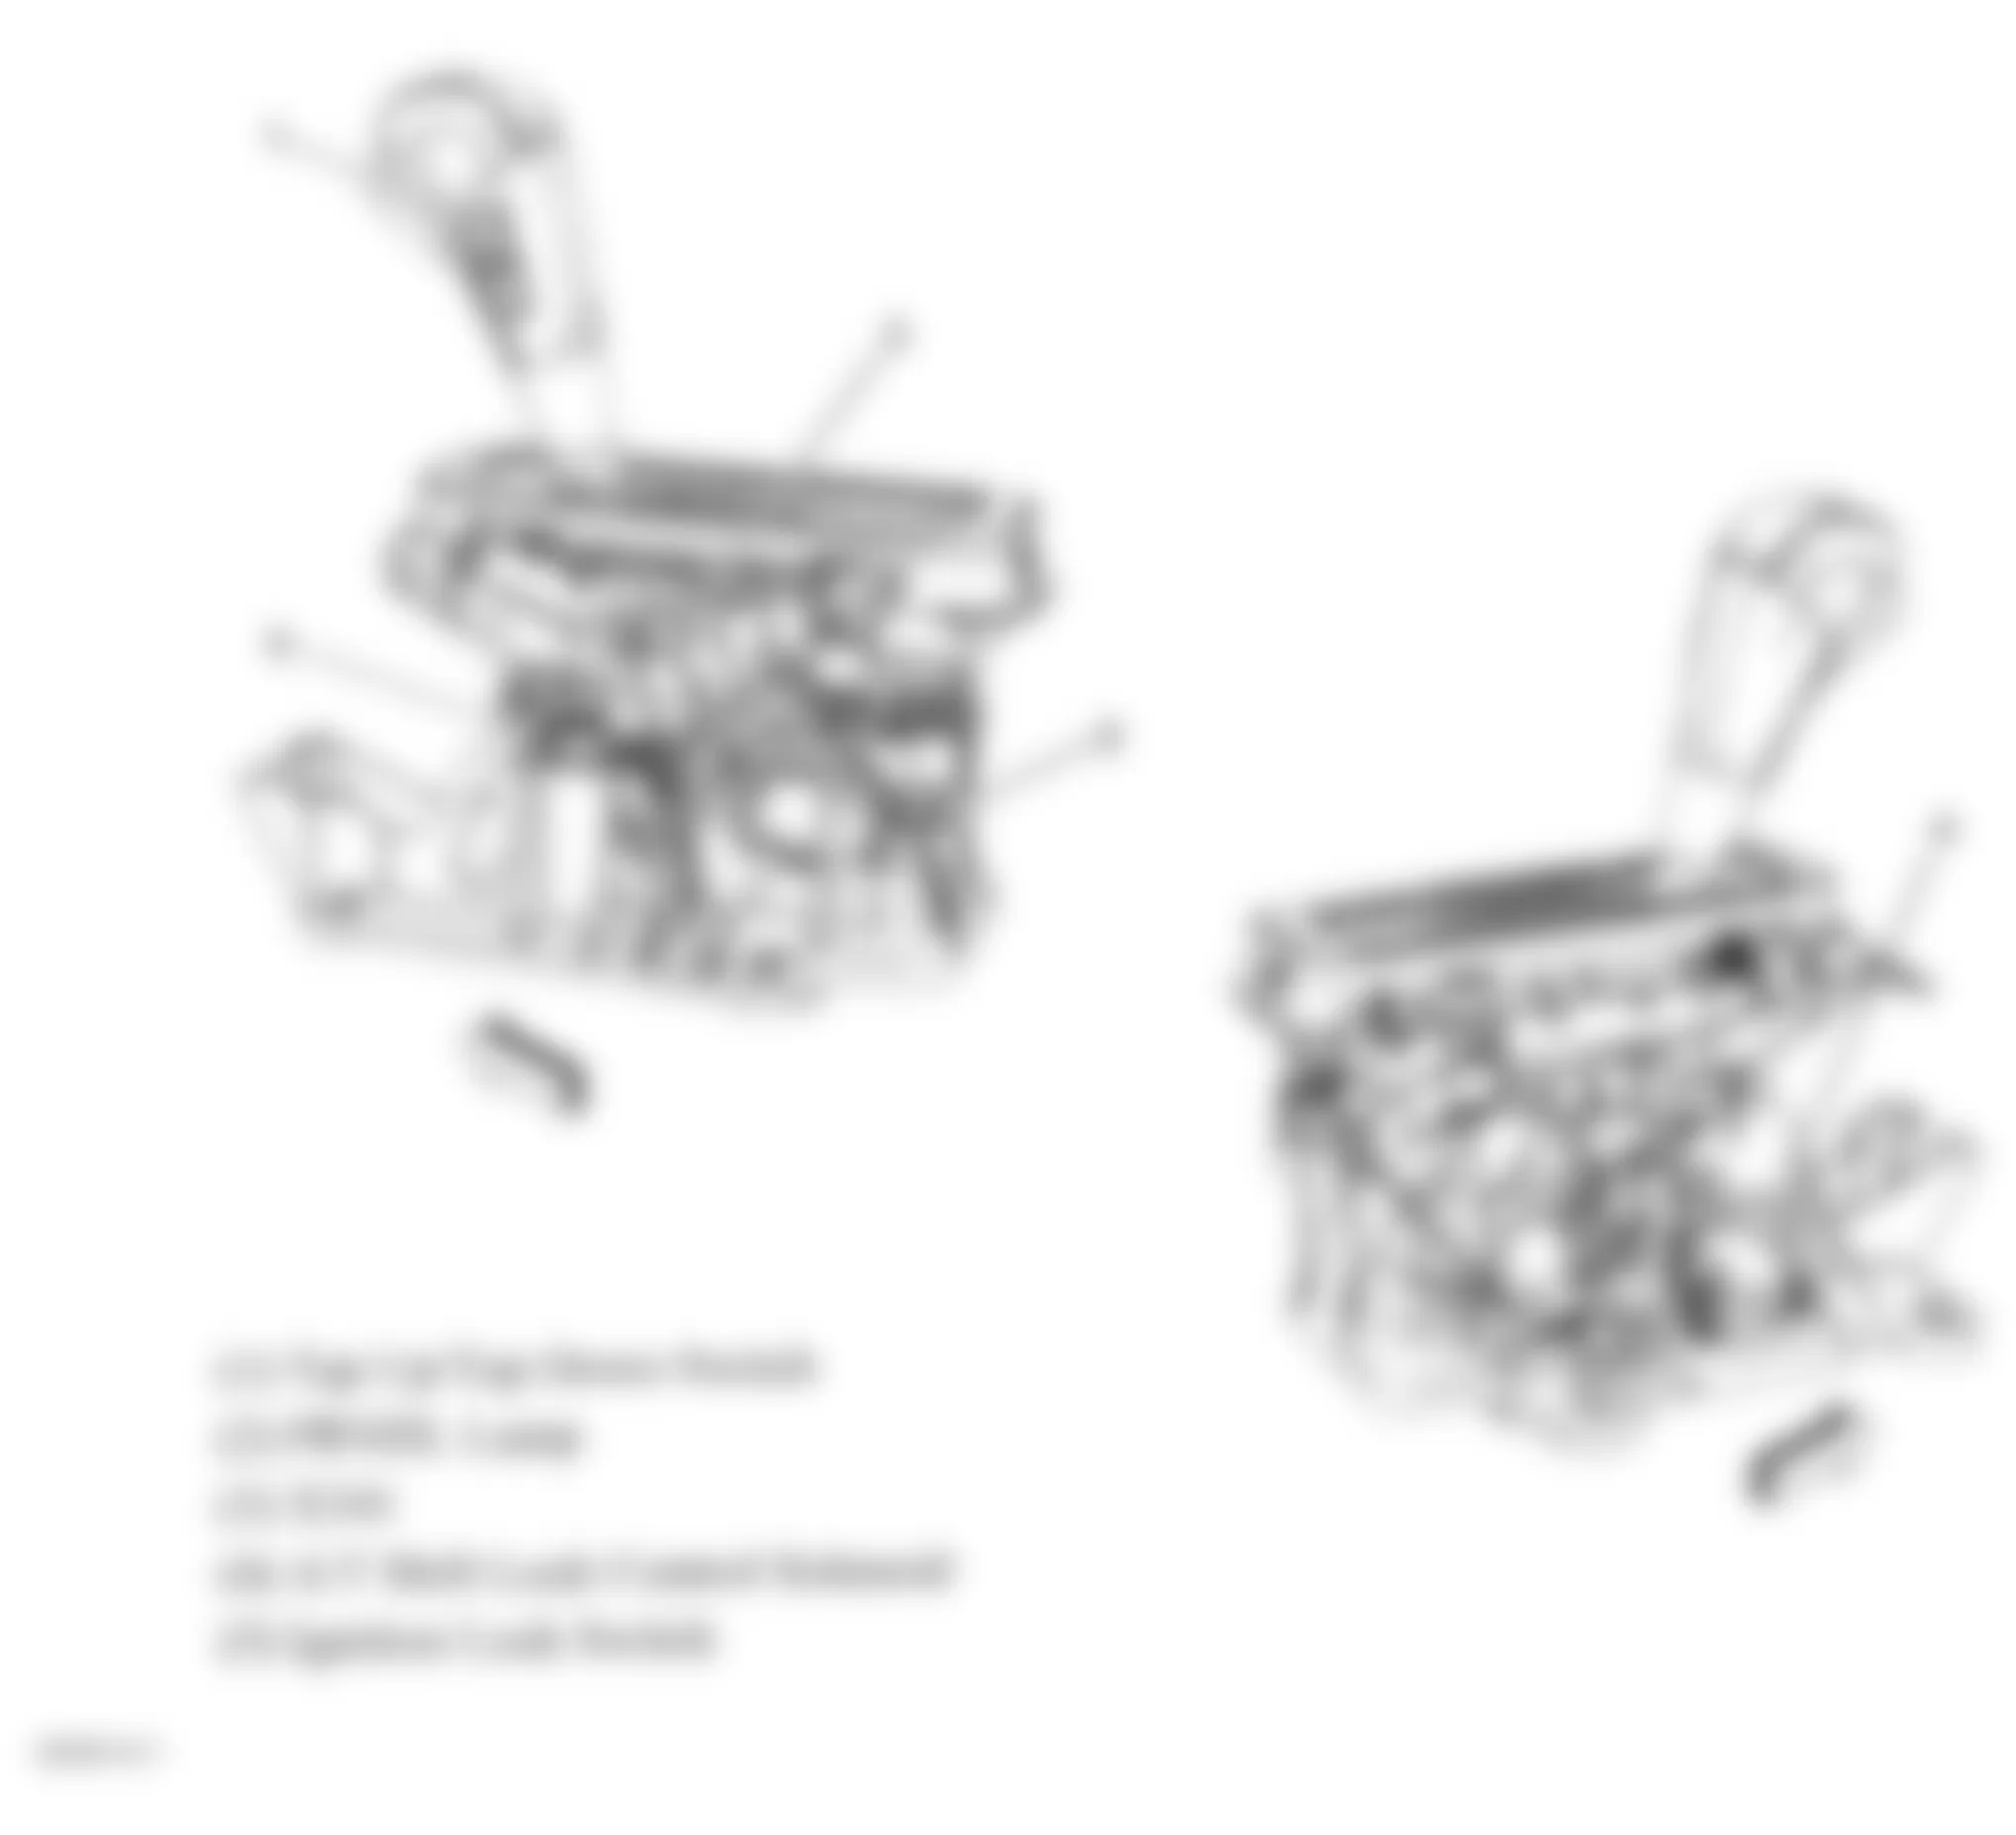 GMC Acadia SLT 2009 - Component Locations -  Shifter Assembly